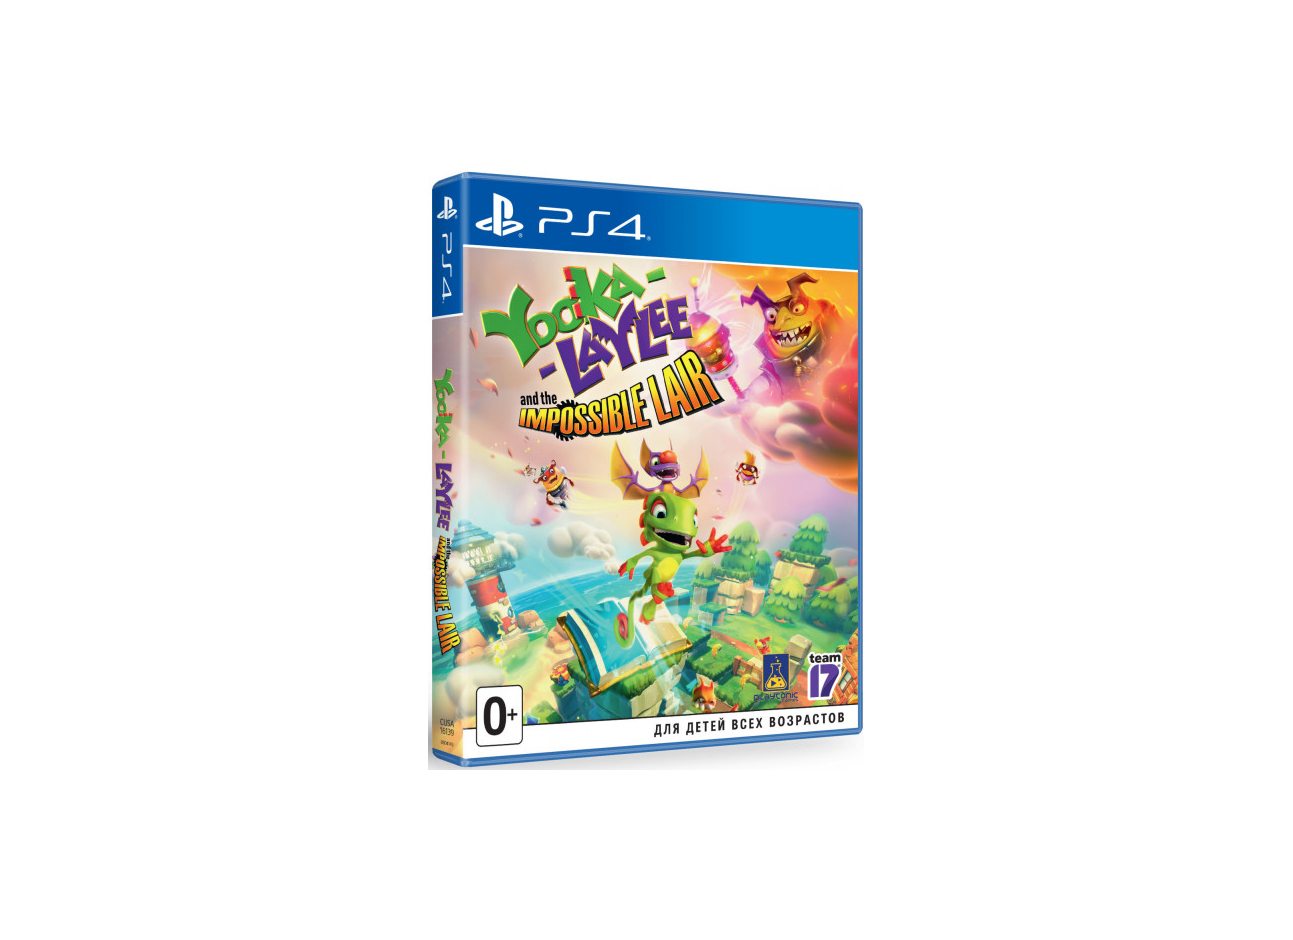 PS 4 Yooka-Laylee and the Impossible Lair PS 4